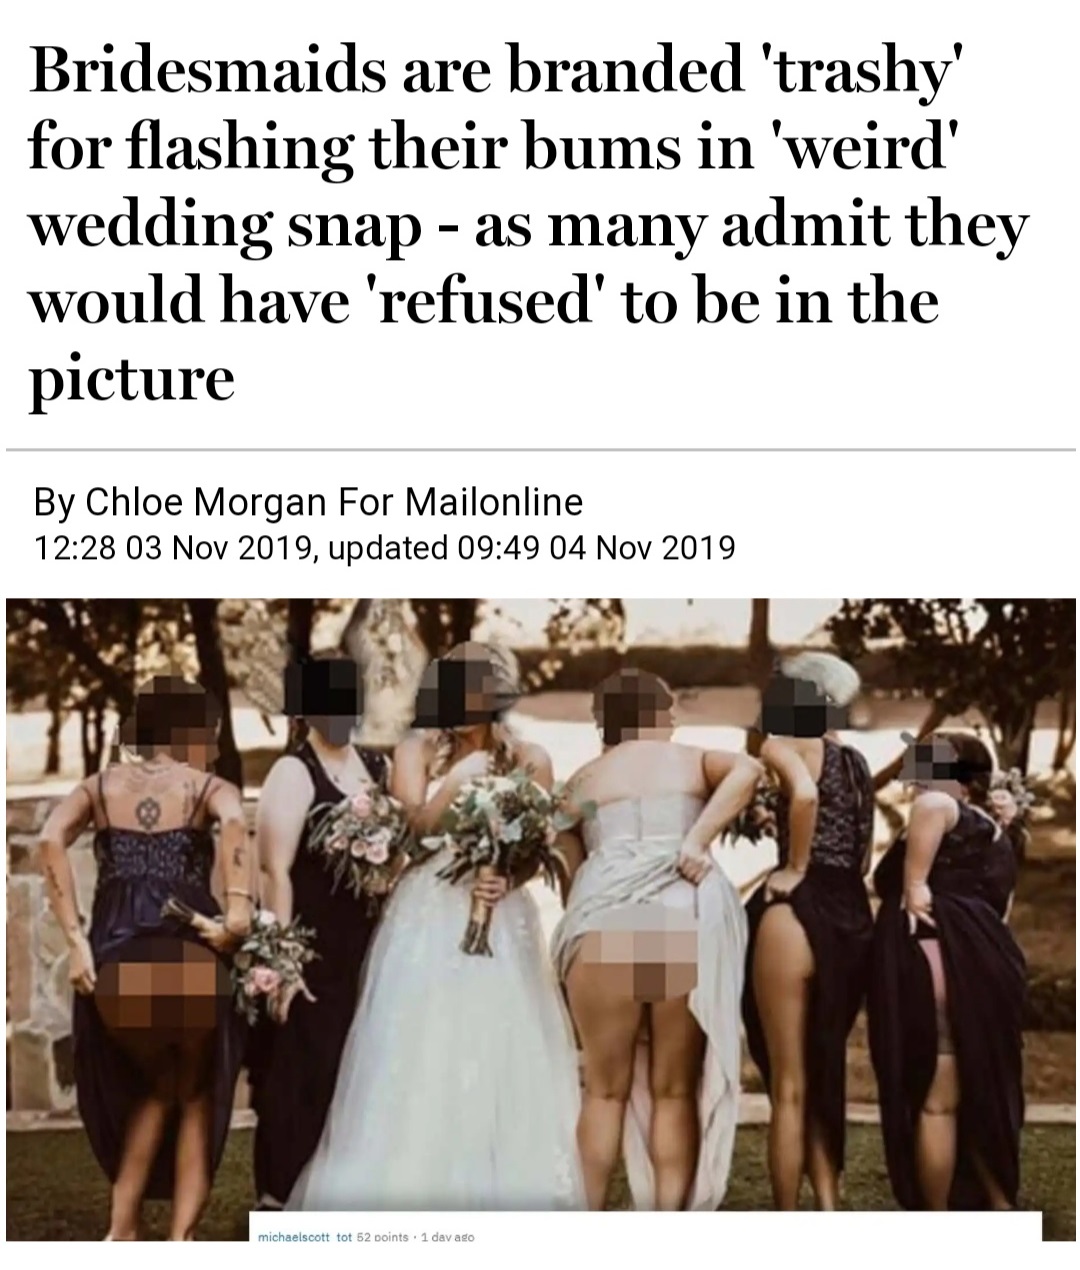 bridesmaids branded trashy for flashing their bums - Bridesmaids are branded 'trashy' for flashing their bums in 'weird' wedding snap as many admit they would have 'refused' to be in the picture By Chloe Morgan For Mailonline , updated michaelscott tot 52